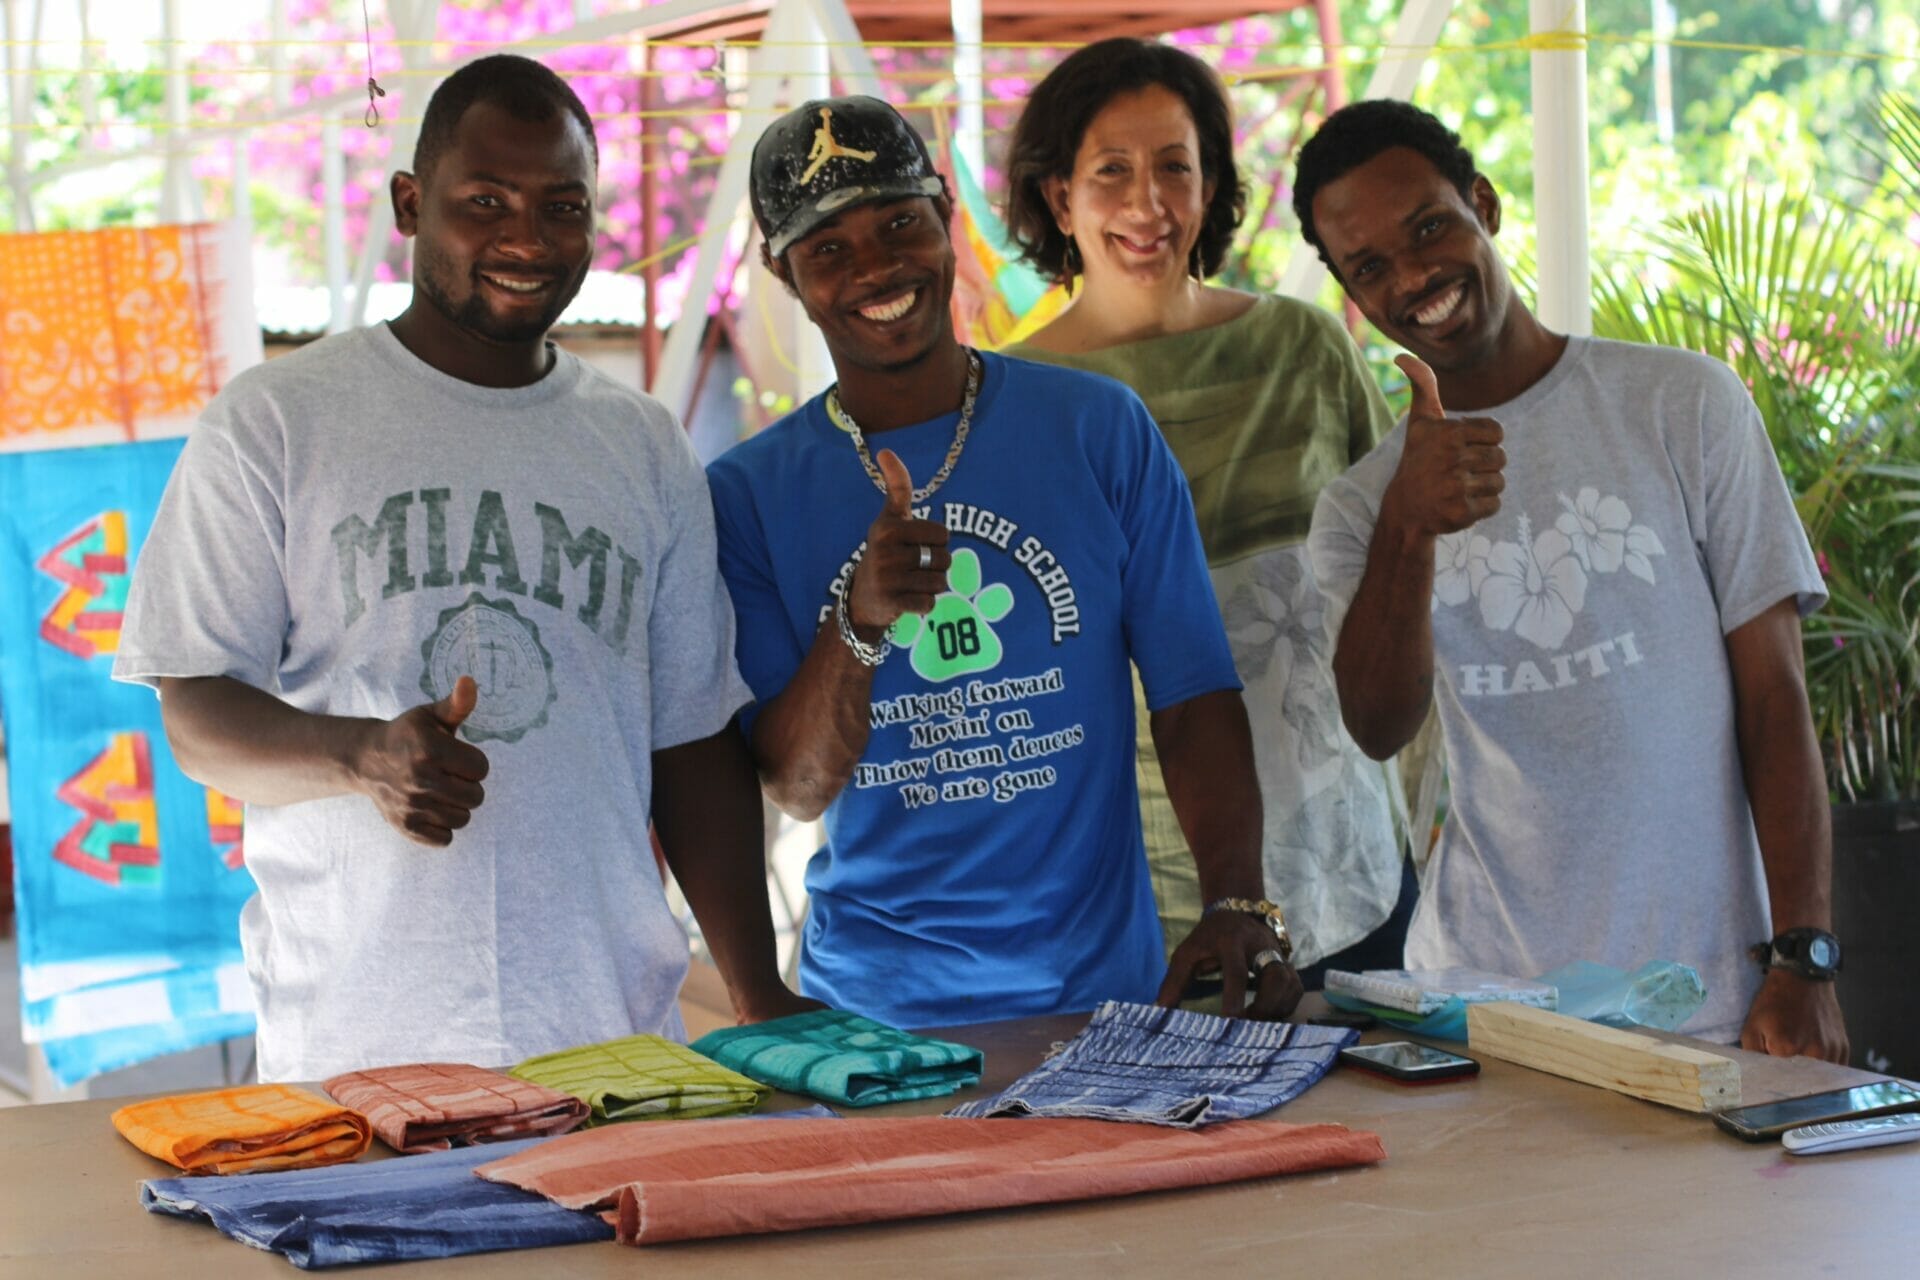 A team from Sandilou poses with gifts from Haiti that they created.